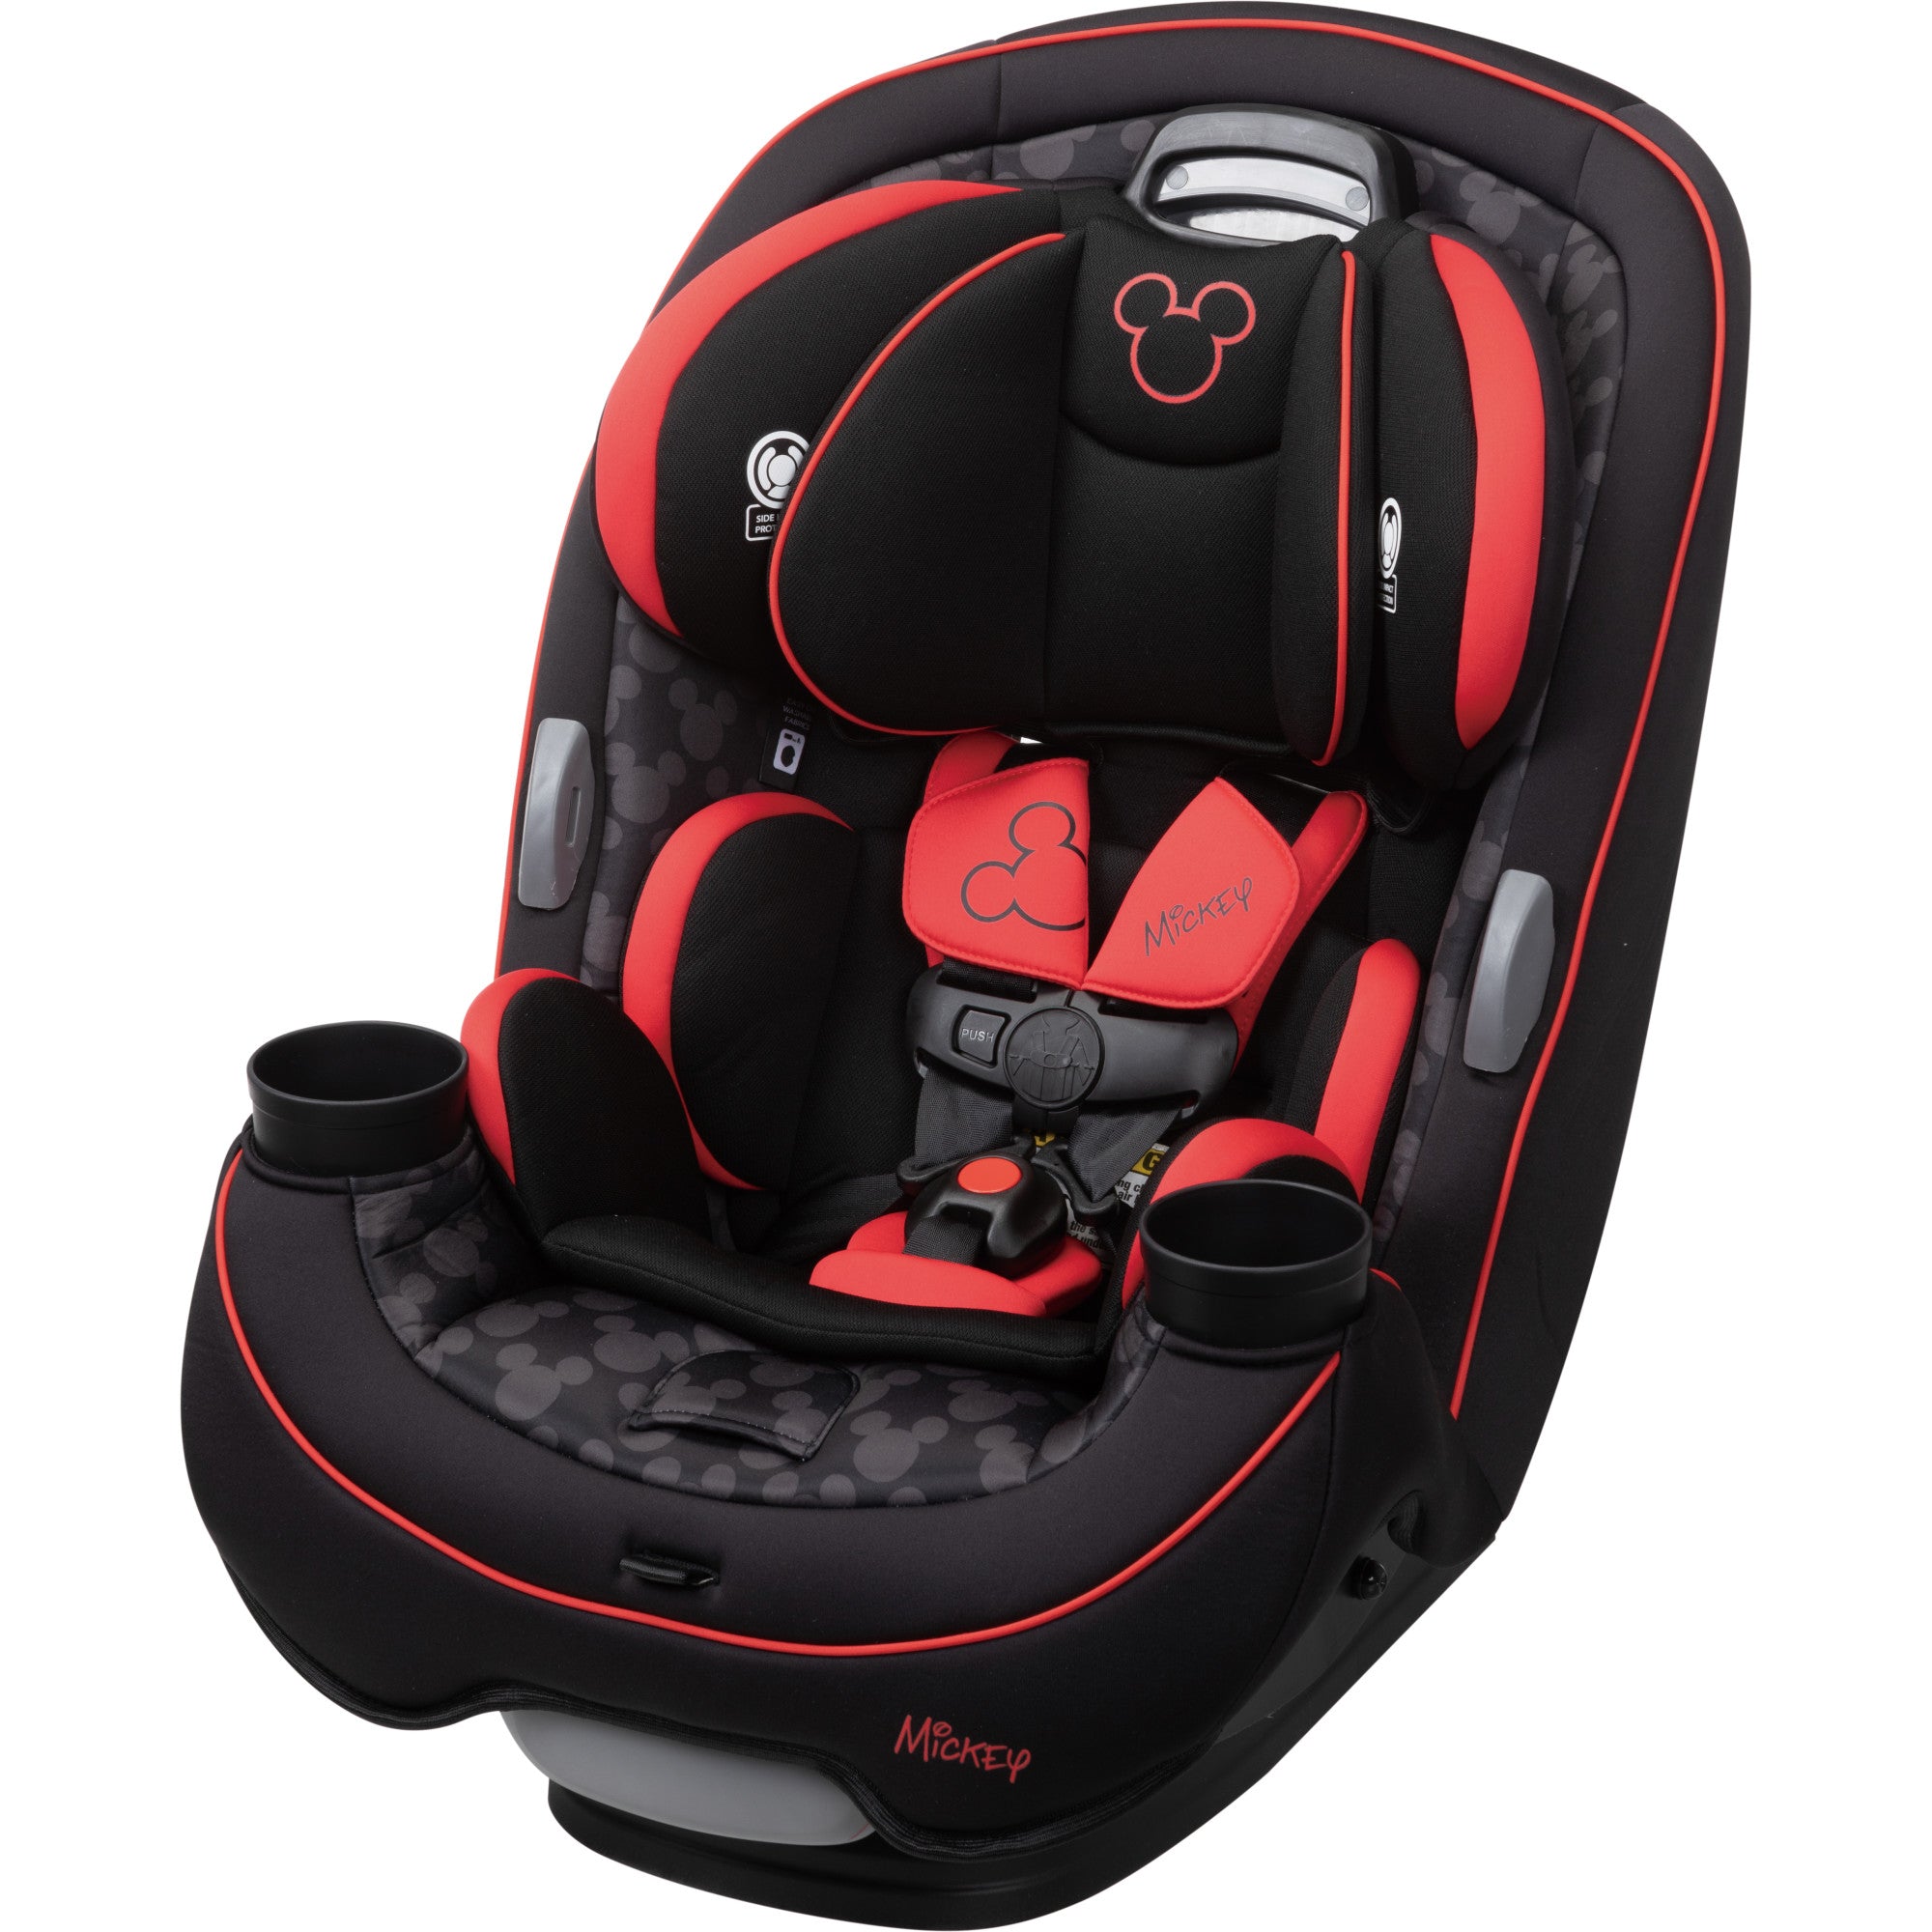 Disney Baby Grow and Go™ All-in-One Convertible Car Seat - the car seat built to GROW for extended use through 3 stages: rear-facing 5-40 lbs., 19"-40"; forward-facing 22-65 lbs., 29"-49"; Belt-positioning booster 40-100 lbs., 43"-52"